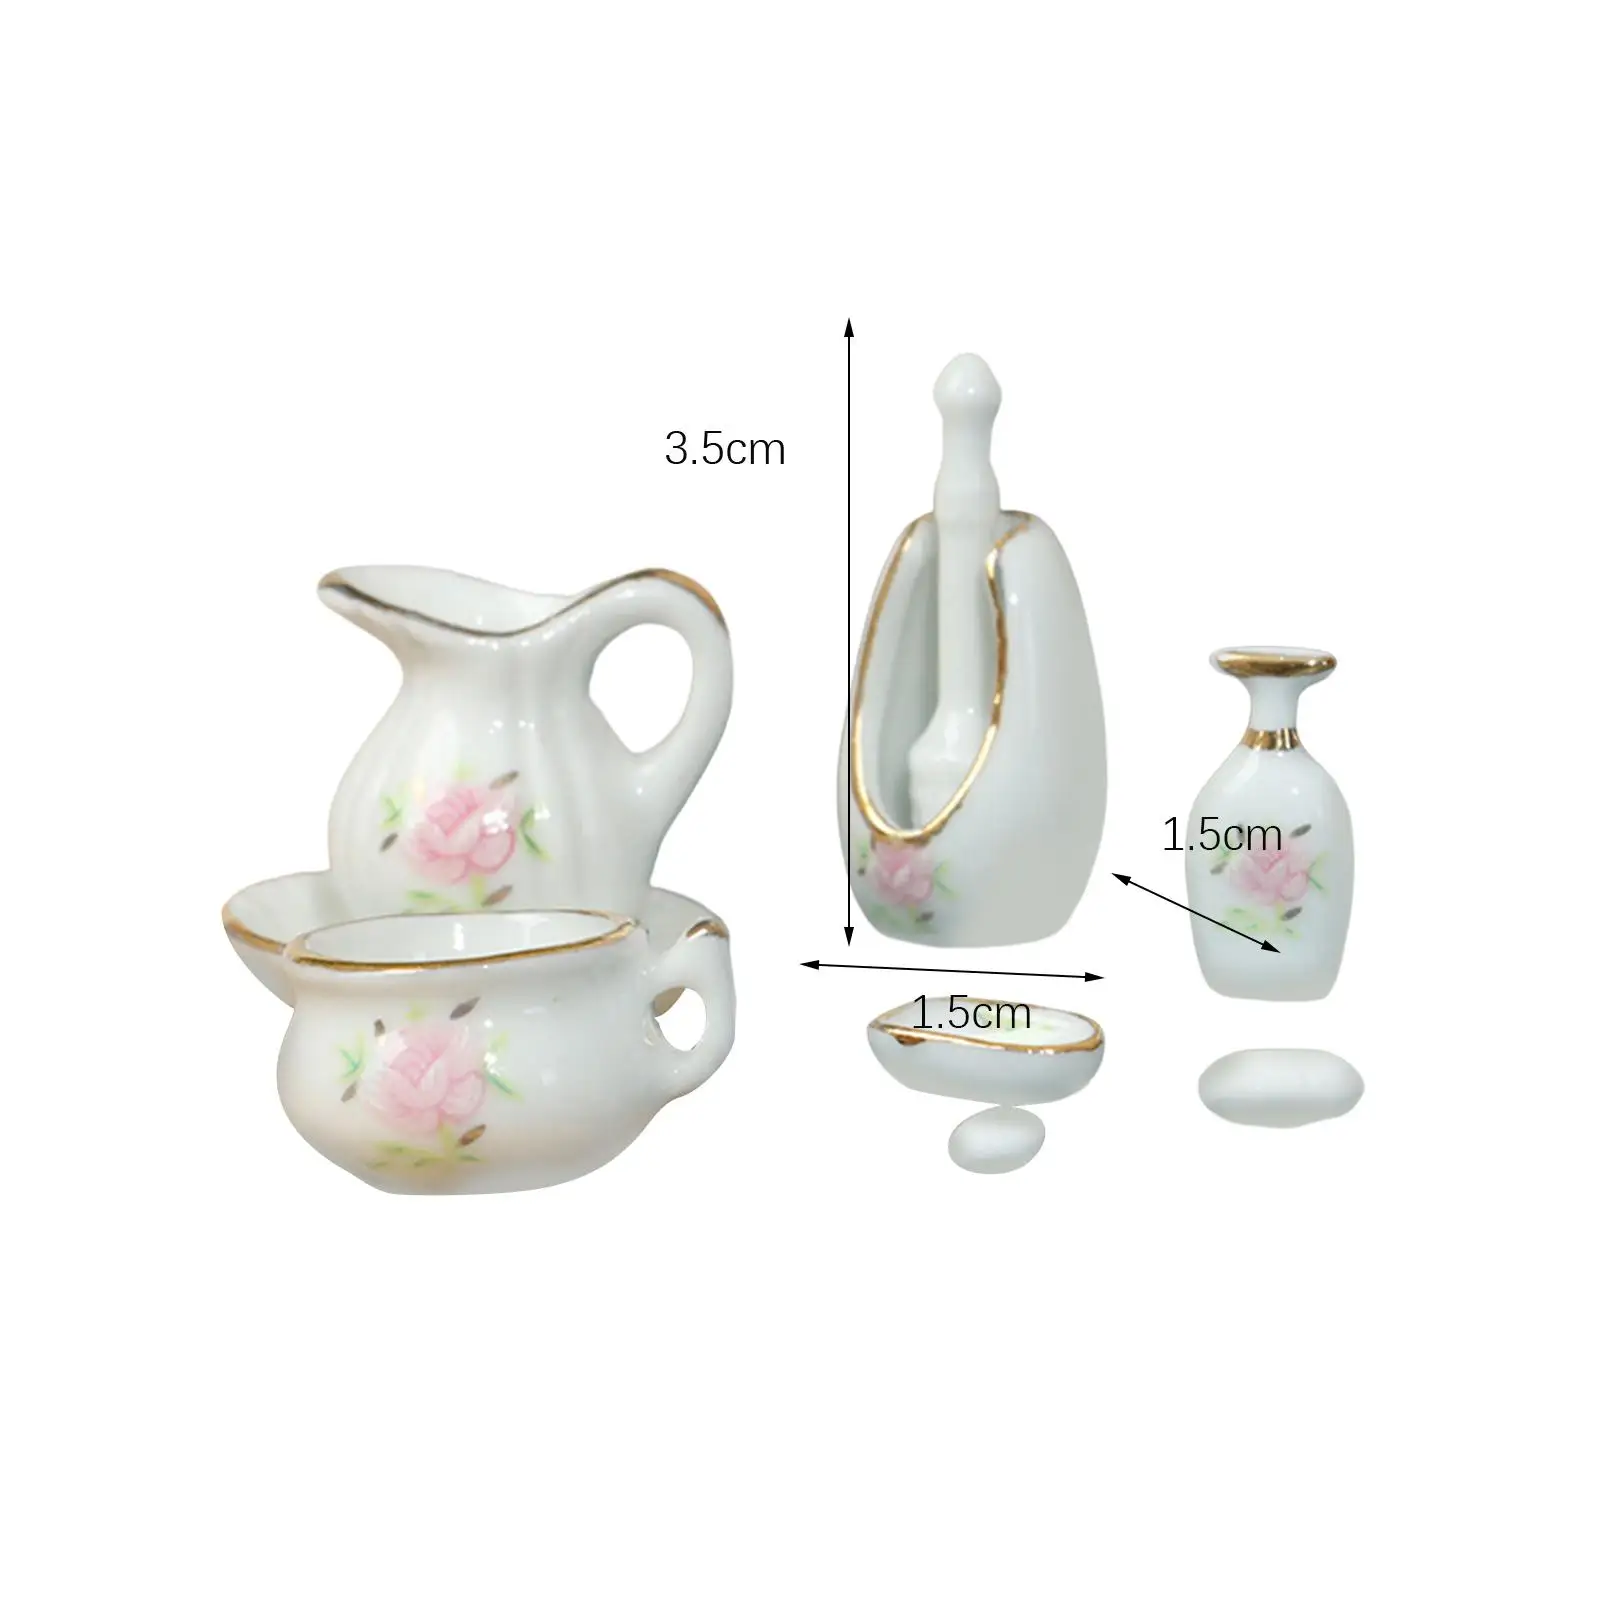 1/12 Dollhouse Furniture Accessories Mini Pots and Cup, Flower Vase, Soap, Soap Tray, Toilet Brush and Holder, and Storage Tray